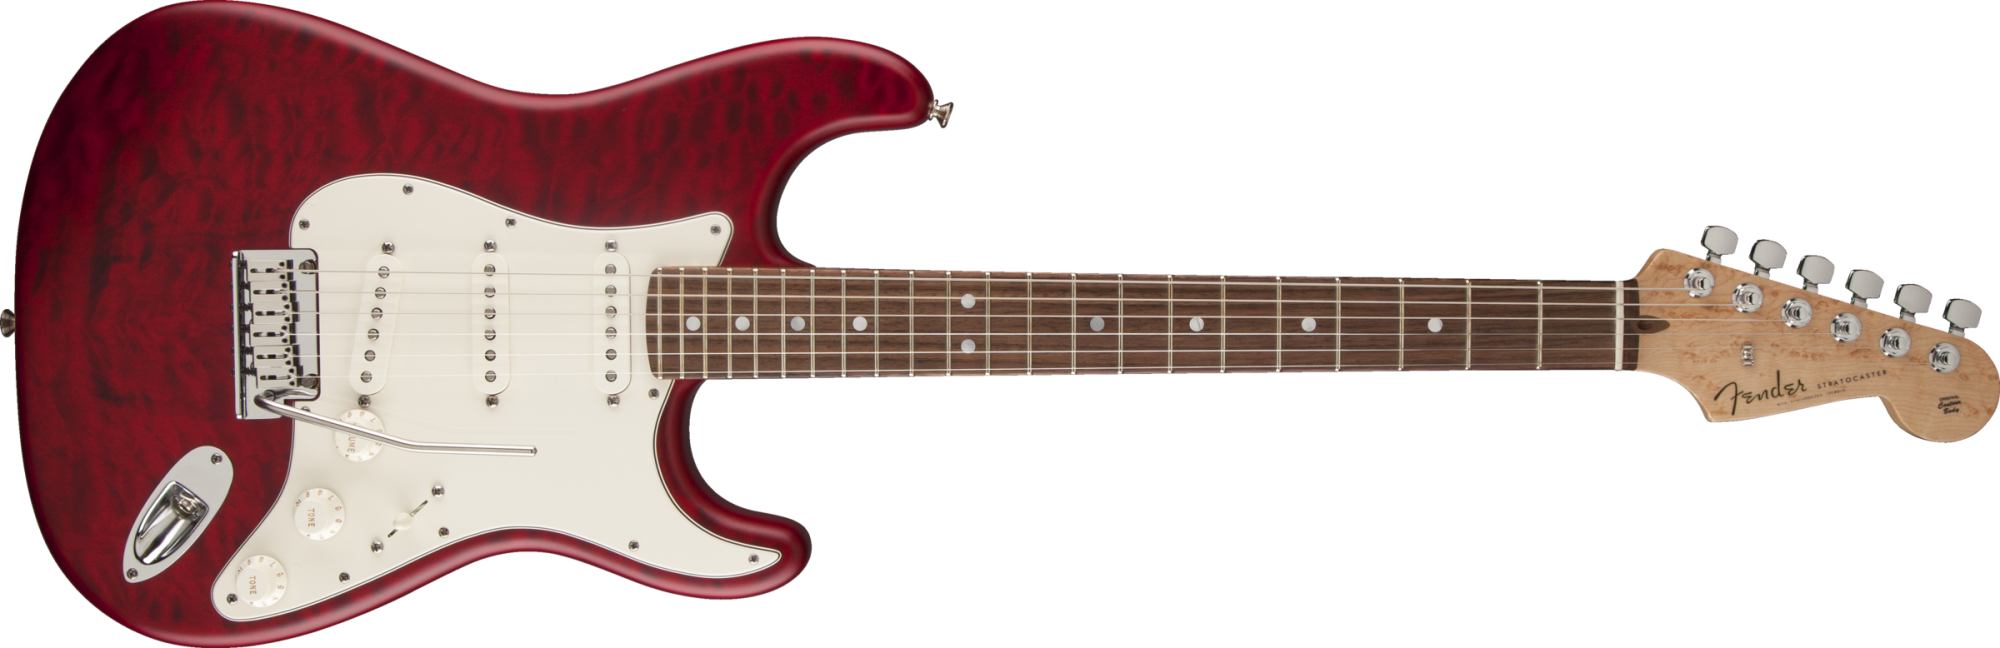 Guitar Instrument Electric PNG Image High Quality PNG Image